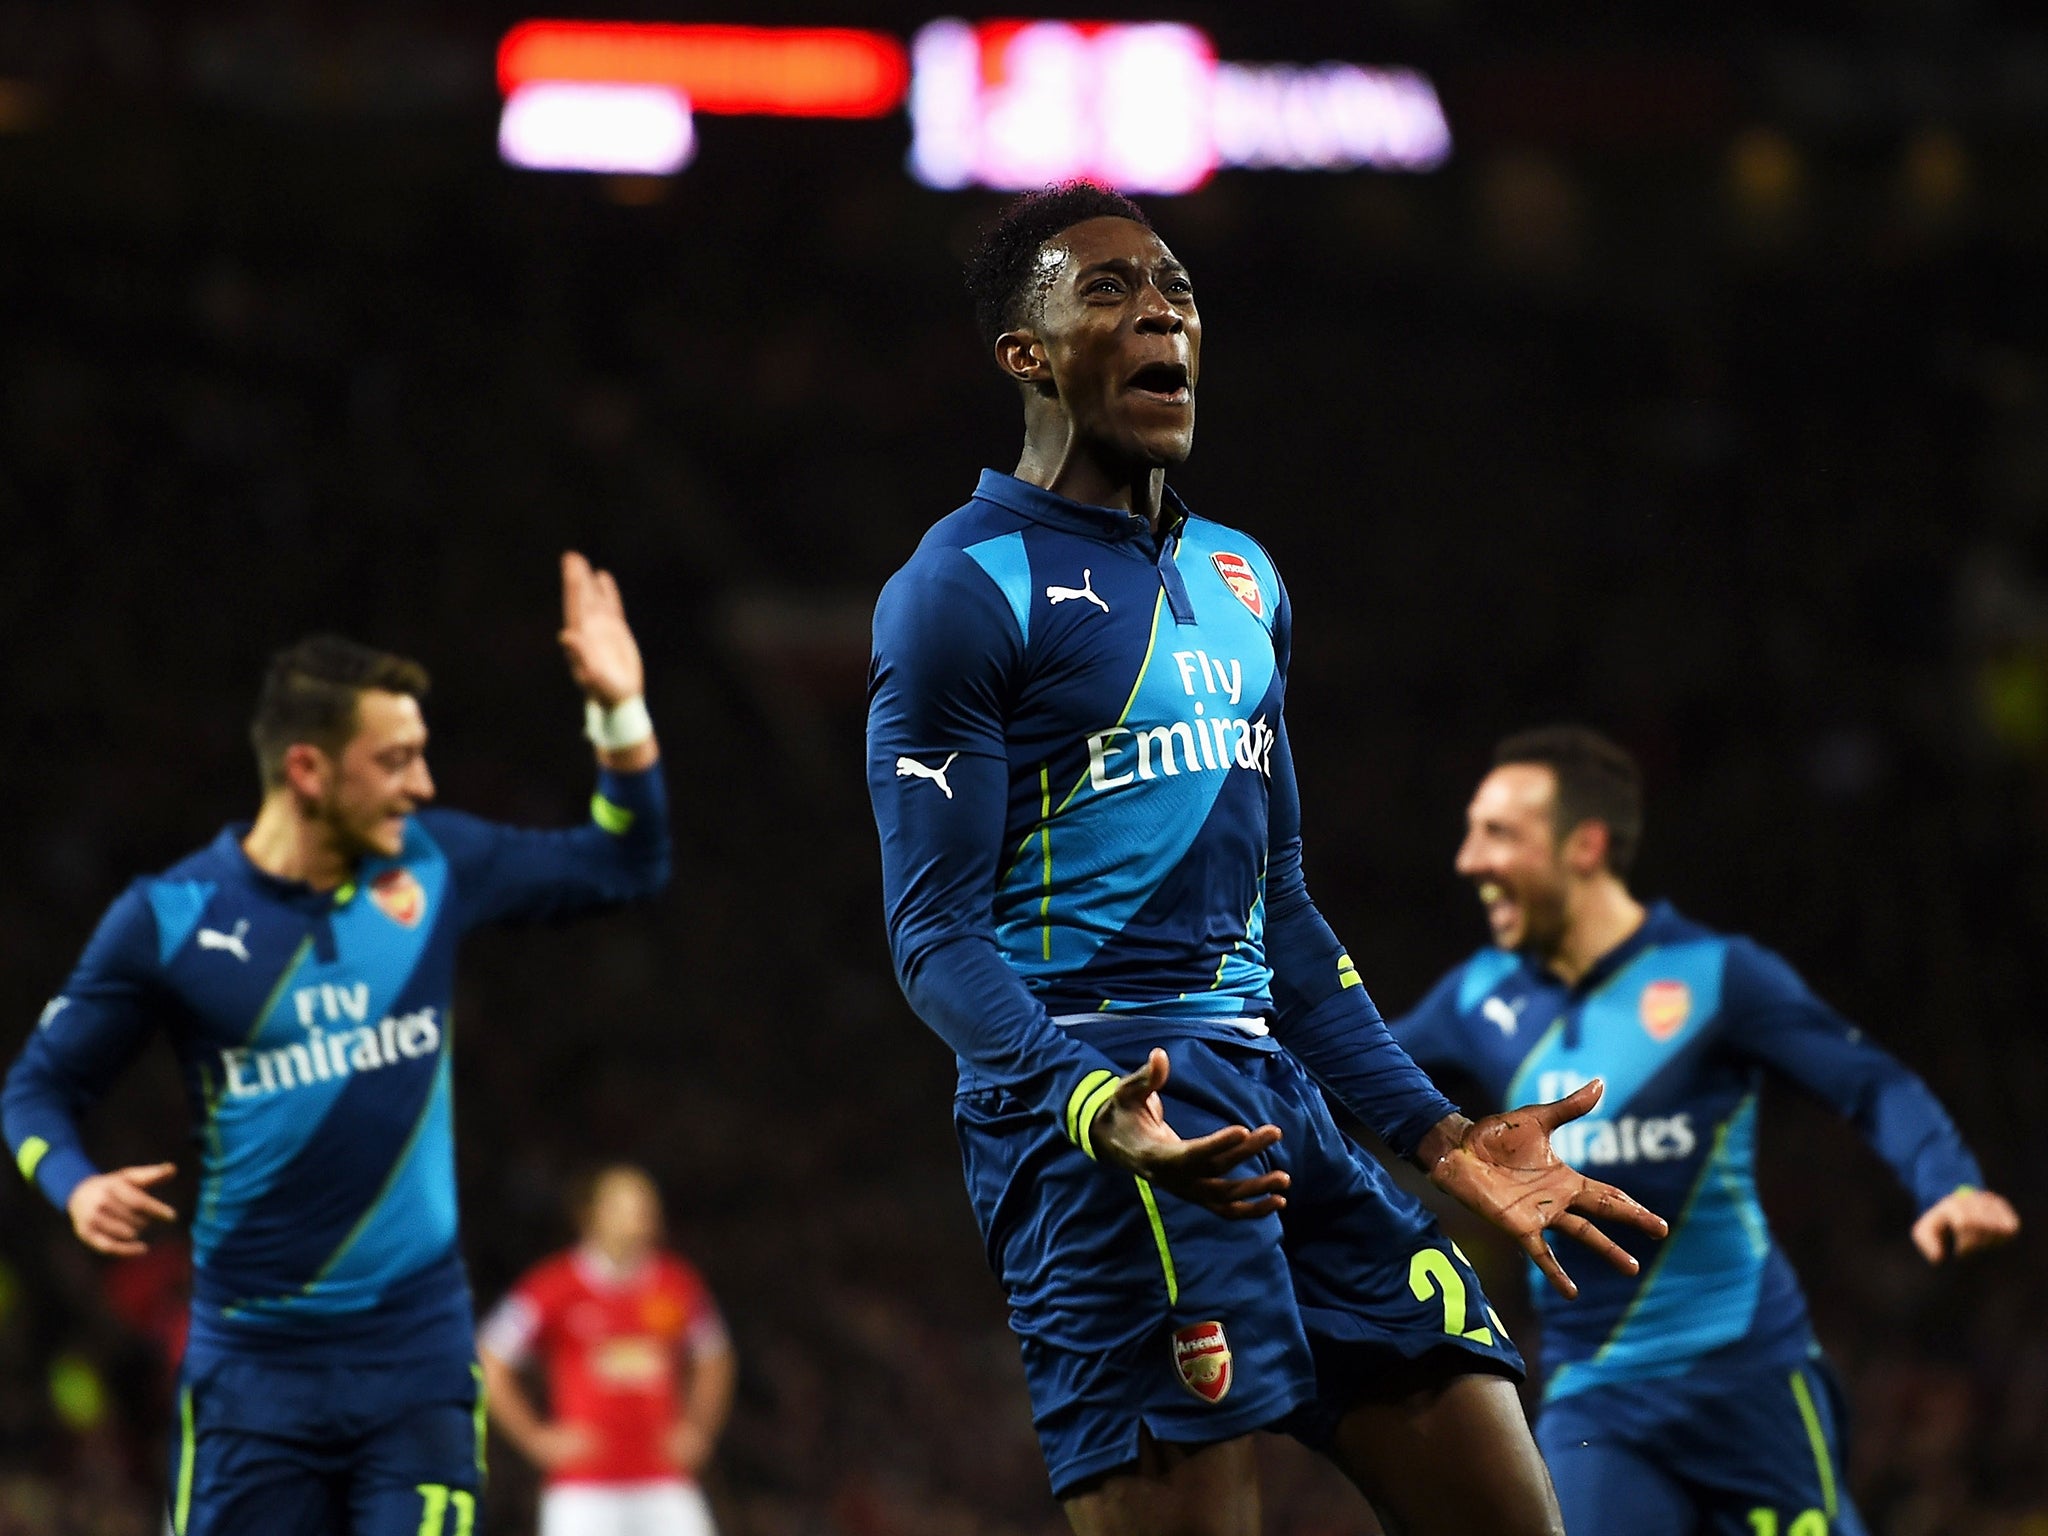 Danny Welbeck celebrates after making it 2-1